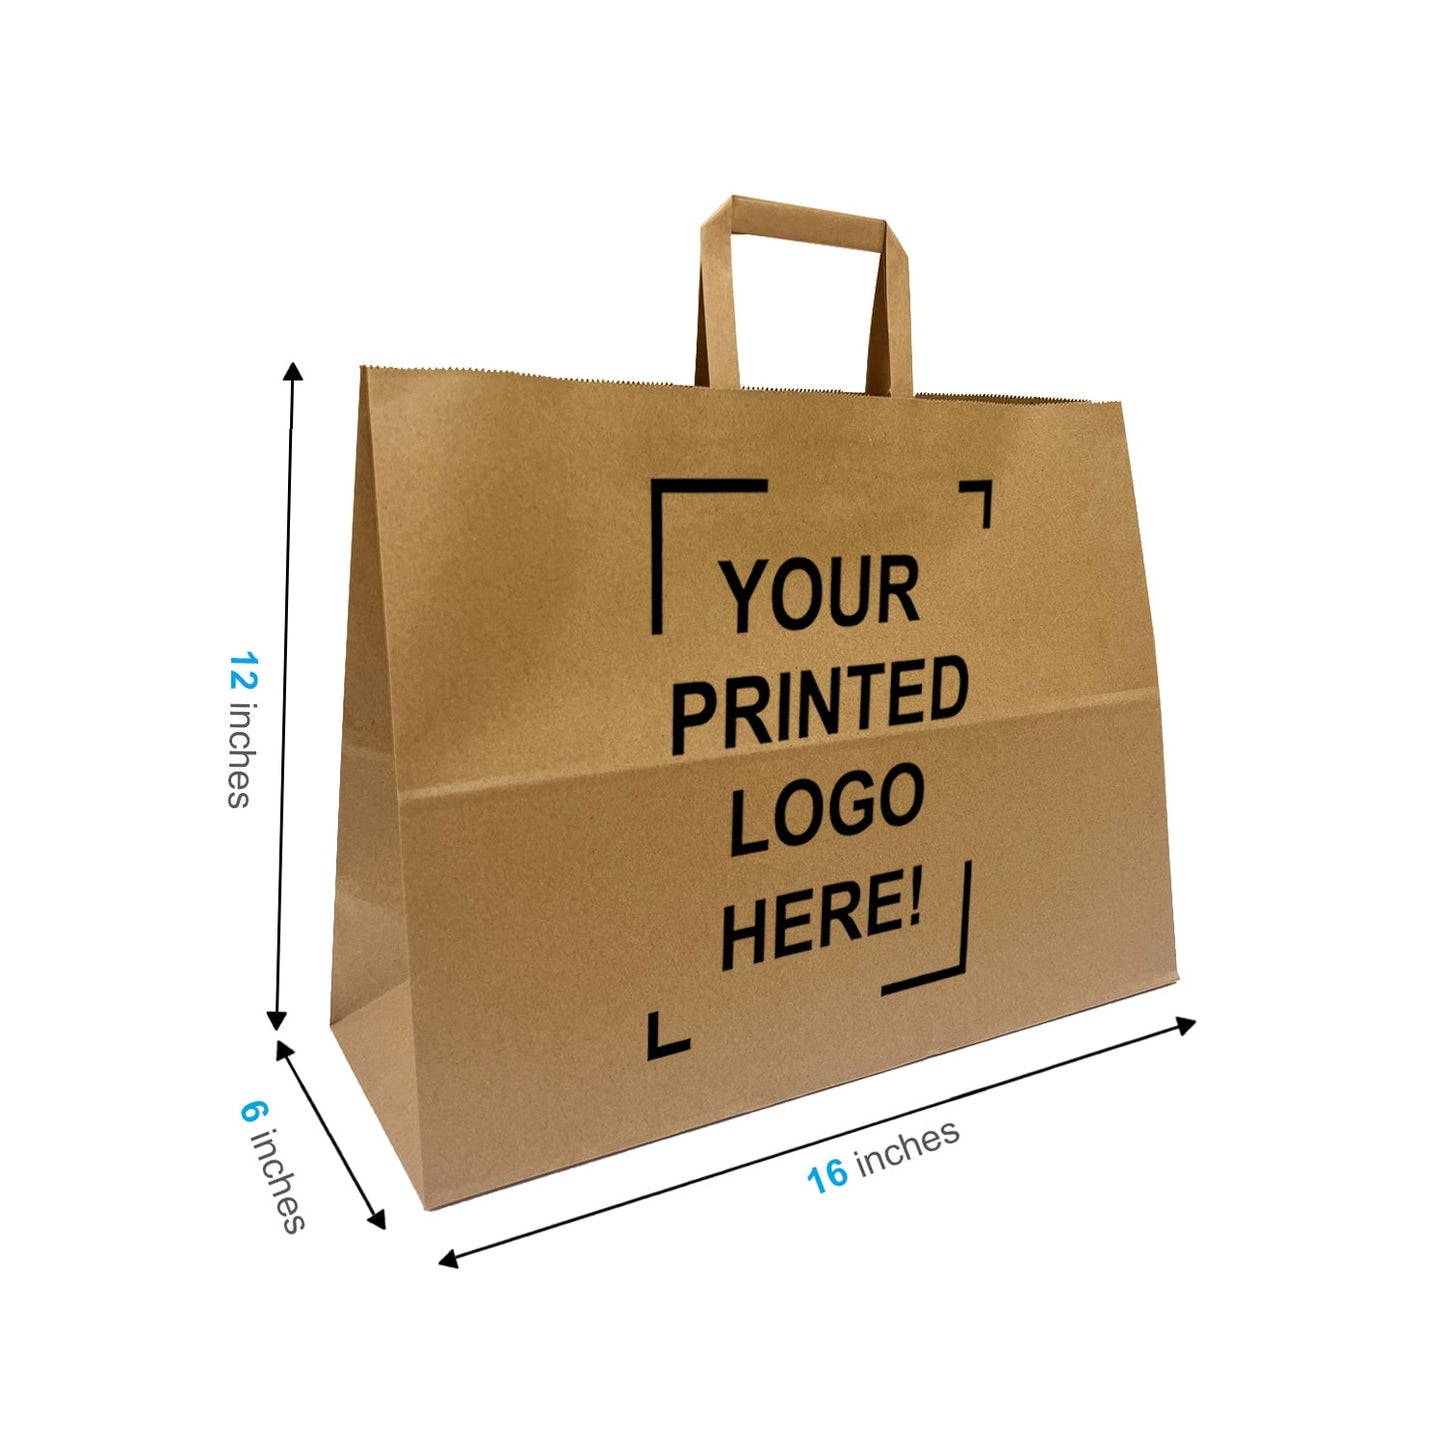 300 Pcs, Vogue, 16x6x12 inches, White Paper Bags, with Twisted Handle, Full Color Custom Print